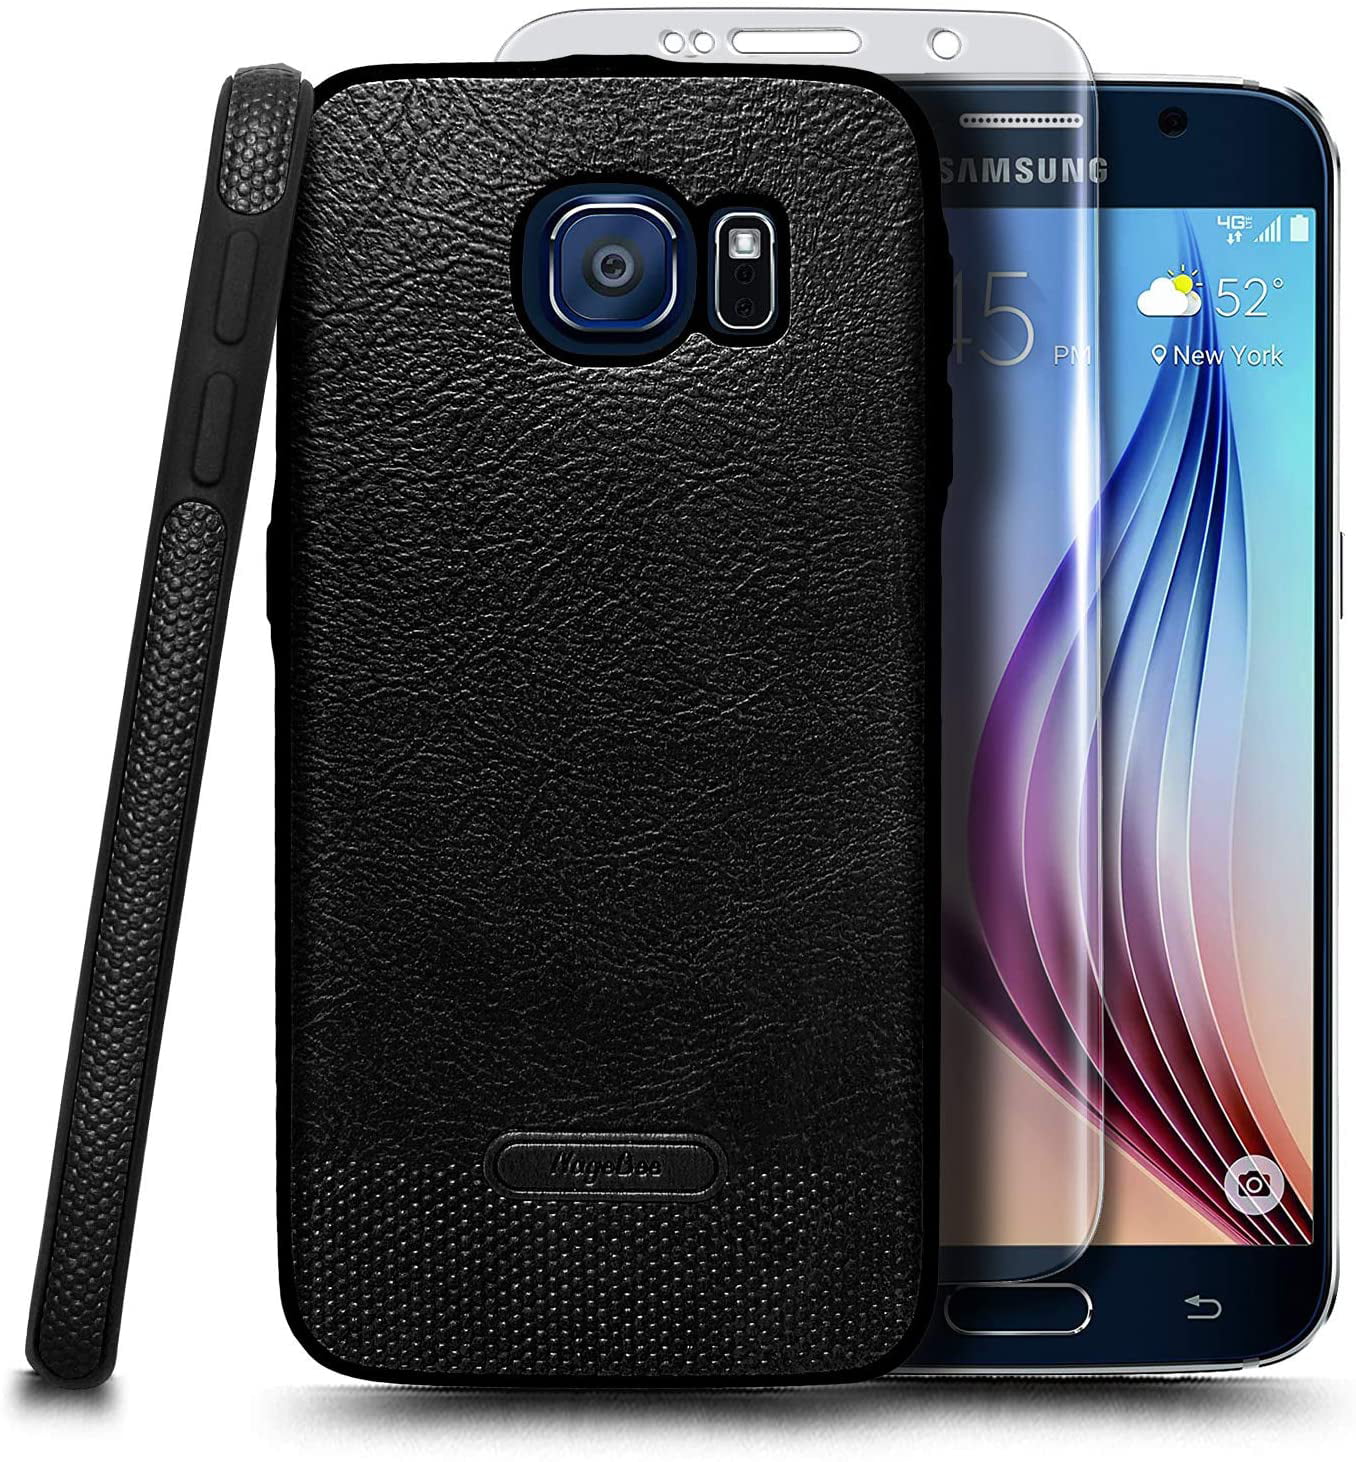 meester capaciteit Het is de bedoeling dat Nagebee Case for Samsung Galaxy S6 with Tempered Glass Screen Protector,  Premium PU Leather Ultra Thin Slim Fit Soft Flexible Non-Slip Grip  Shockproof Anti-Scratch Cover Case (Black) - Walmart.com